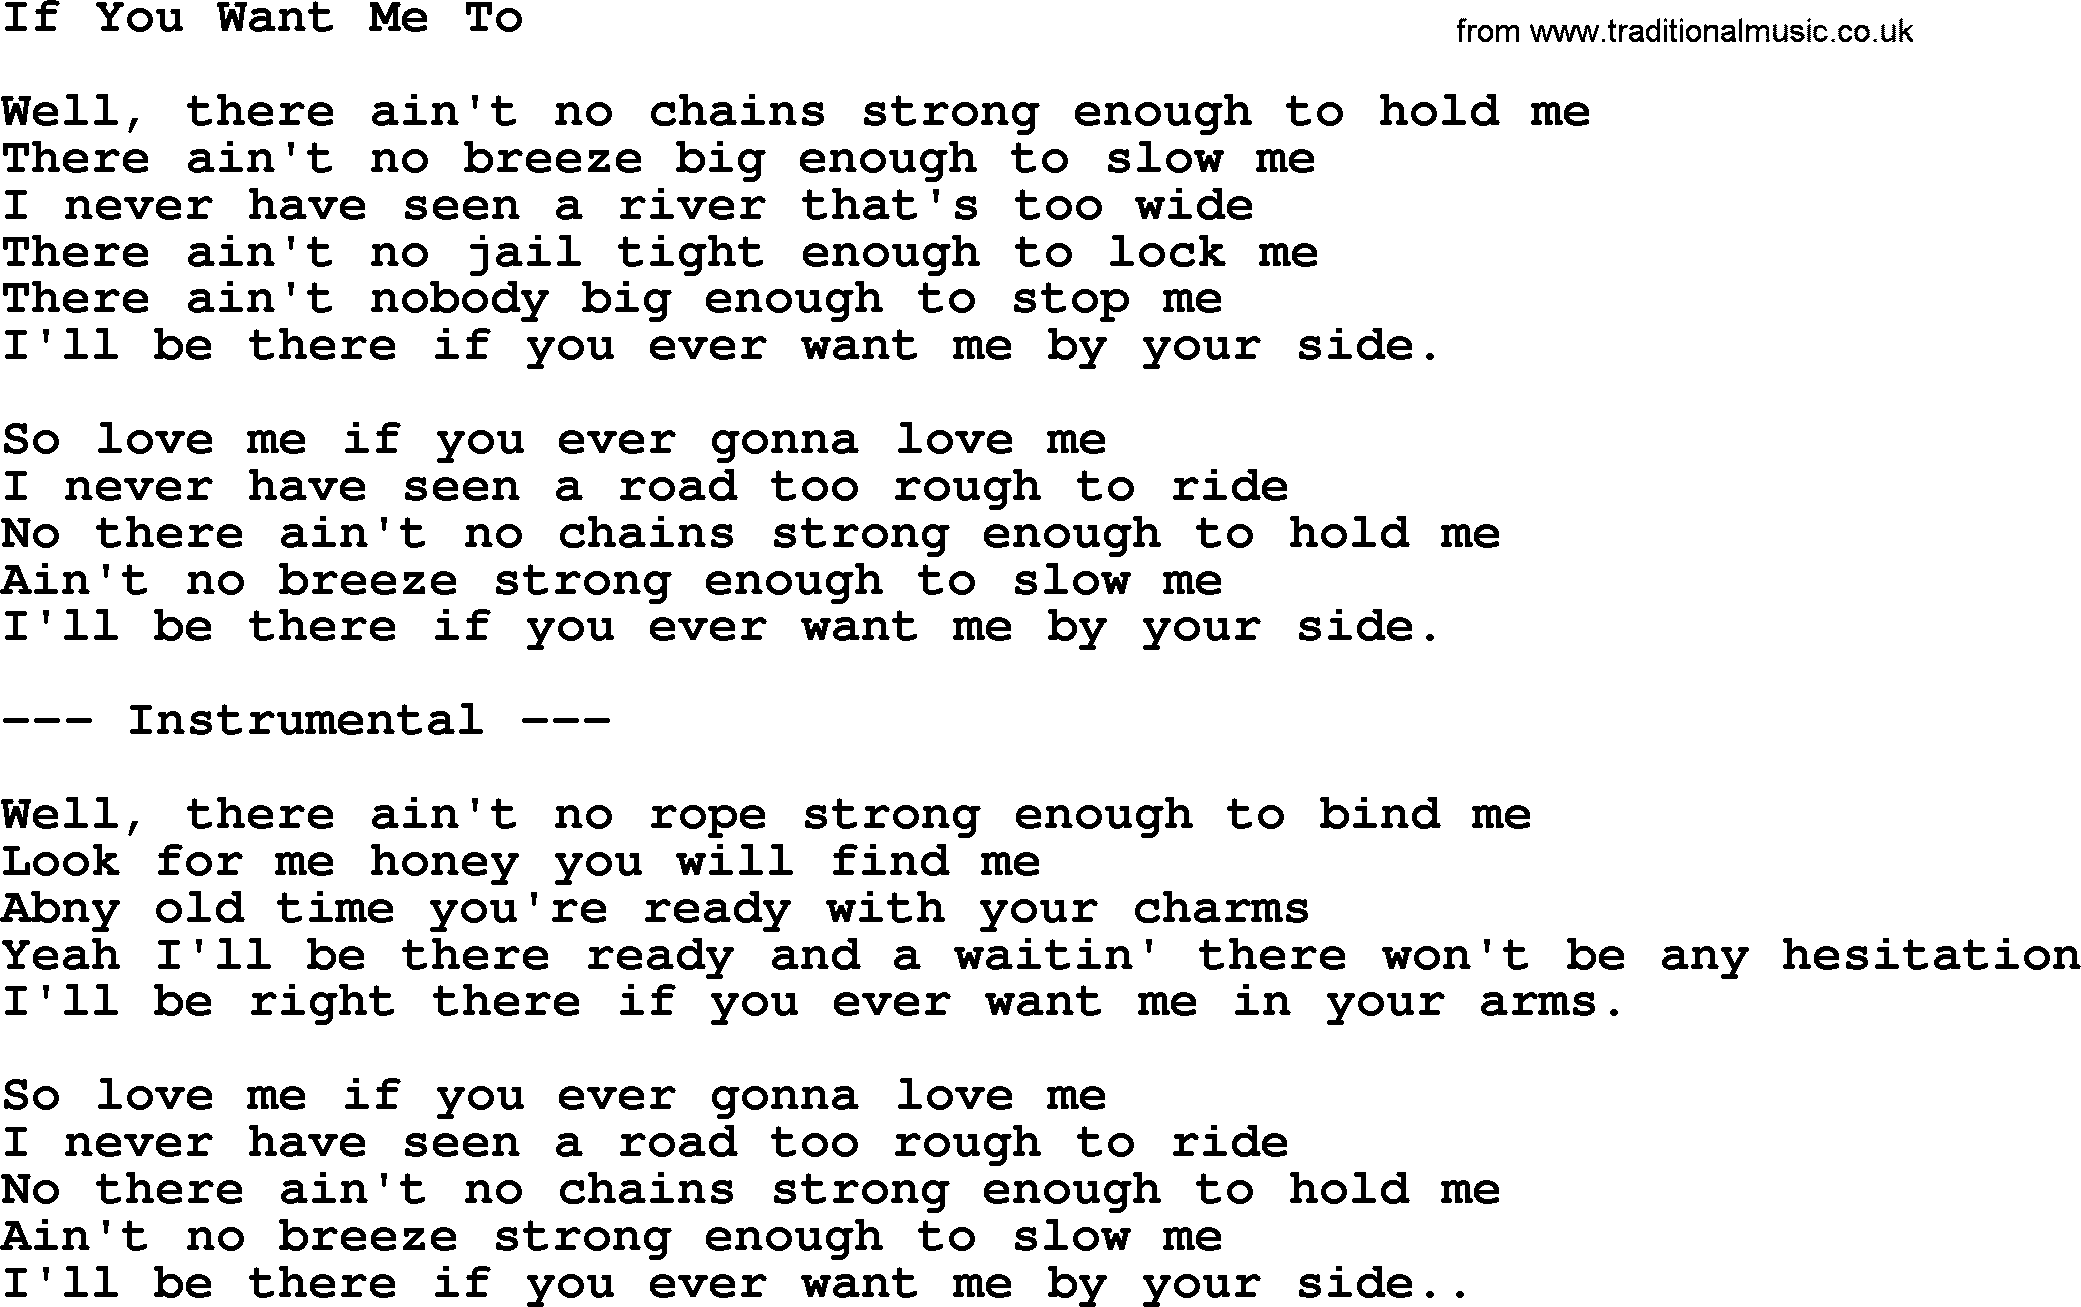 George Jones song: If You Want Me To, lyrics